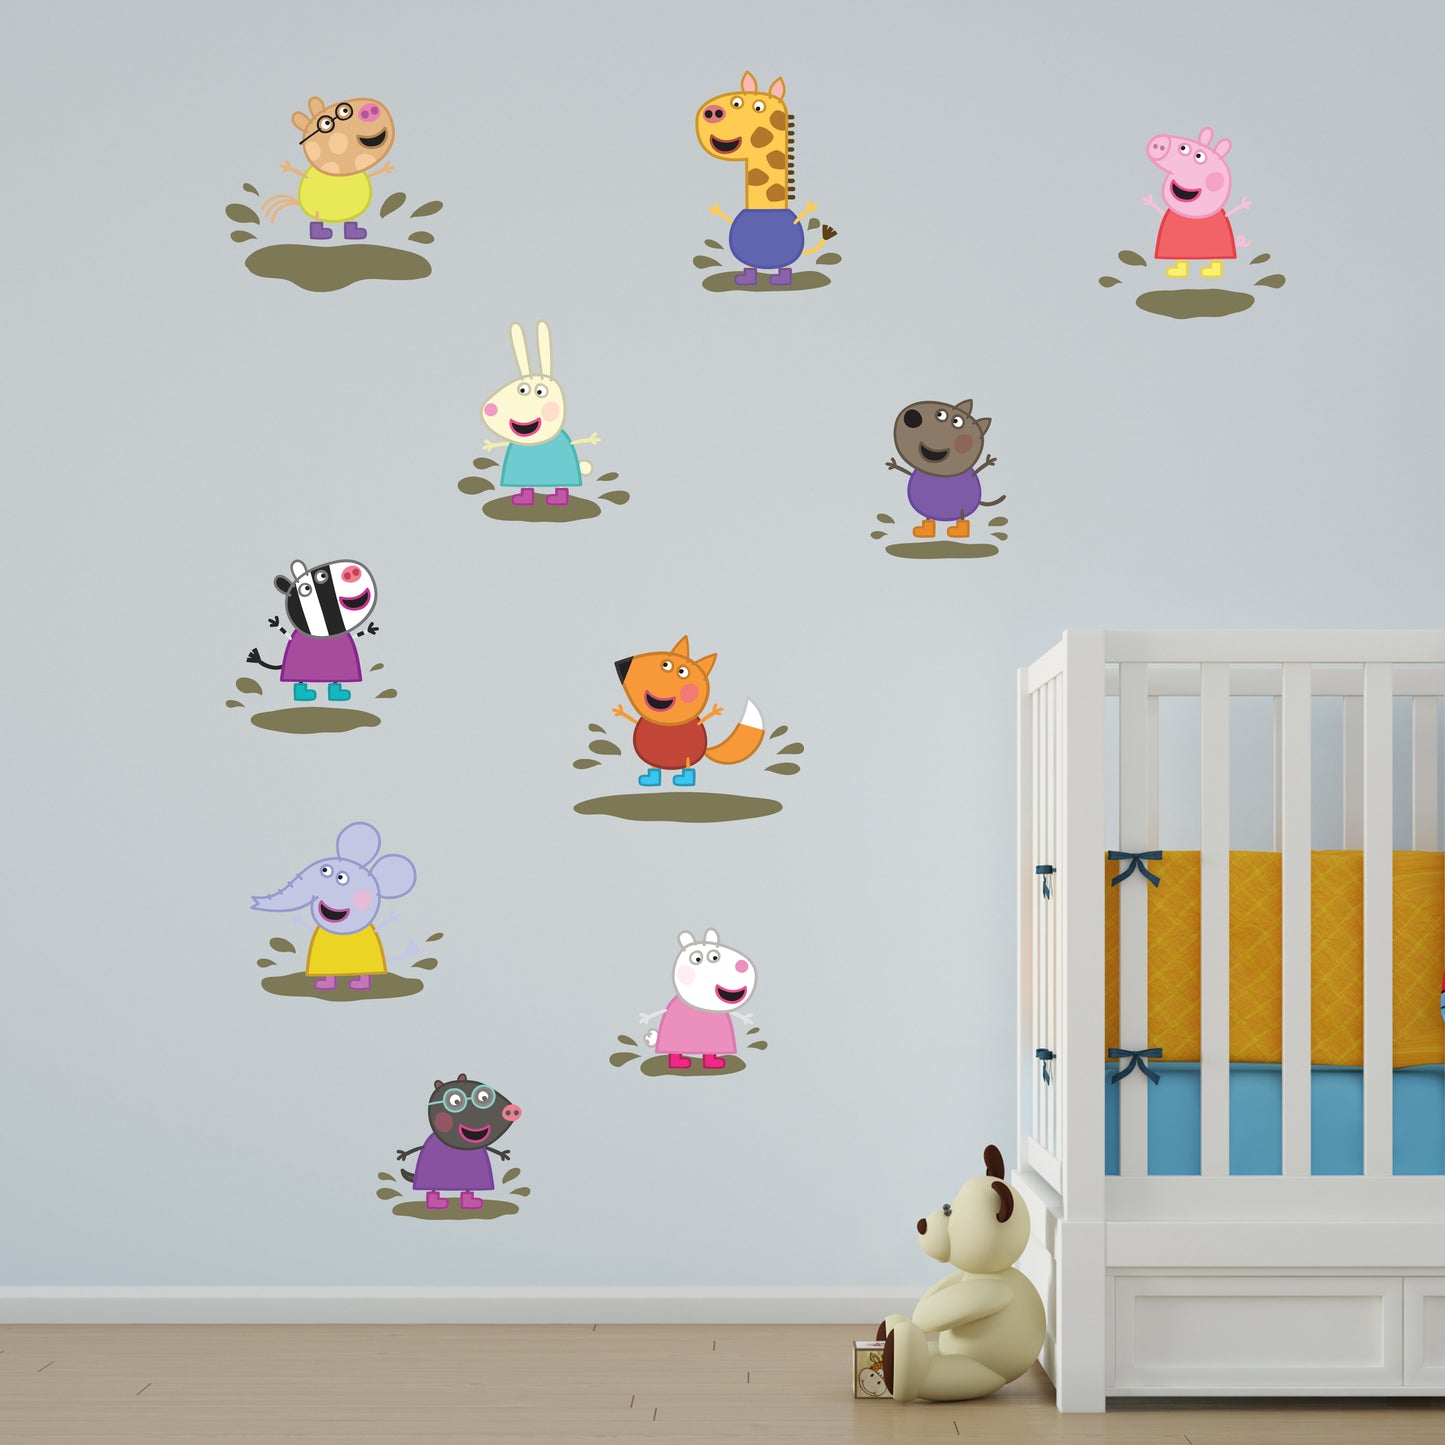 Peppa Pig Wall Sticker - Peppa Pig and Friends Jumping in Muddy Puddles Set Wall Decal Kids Art